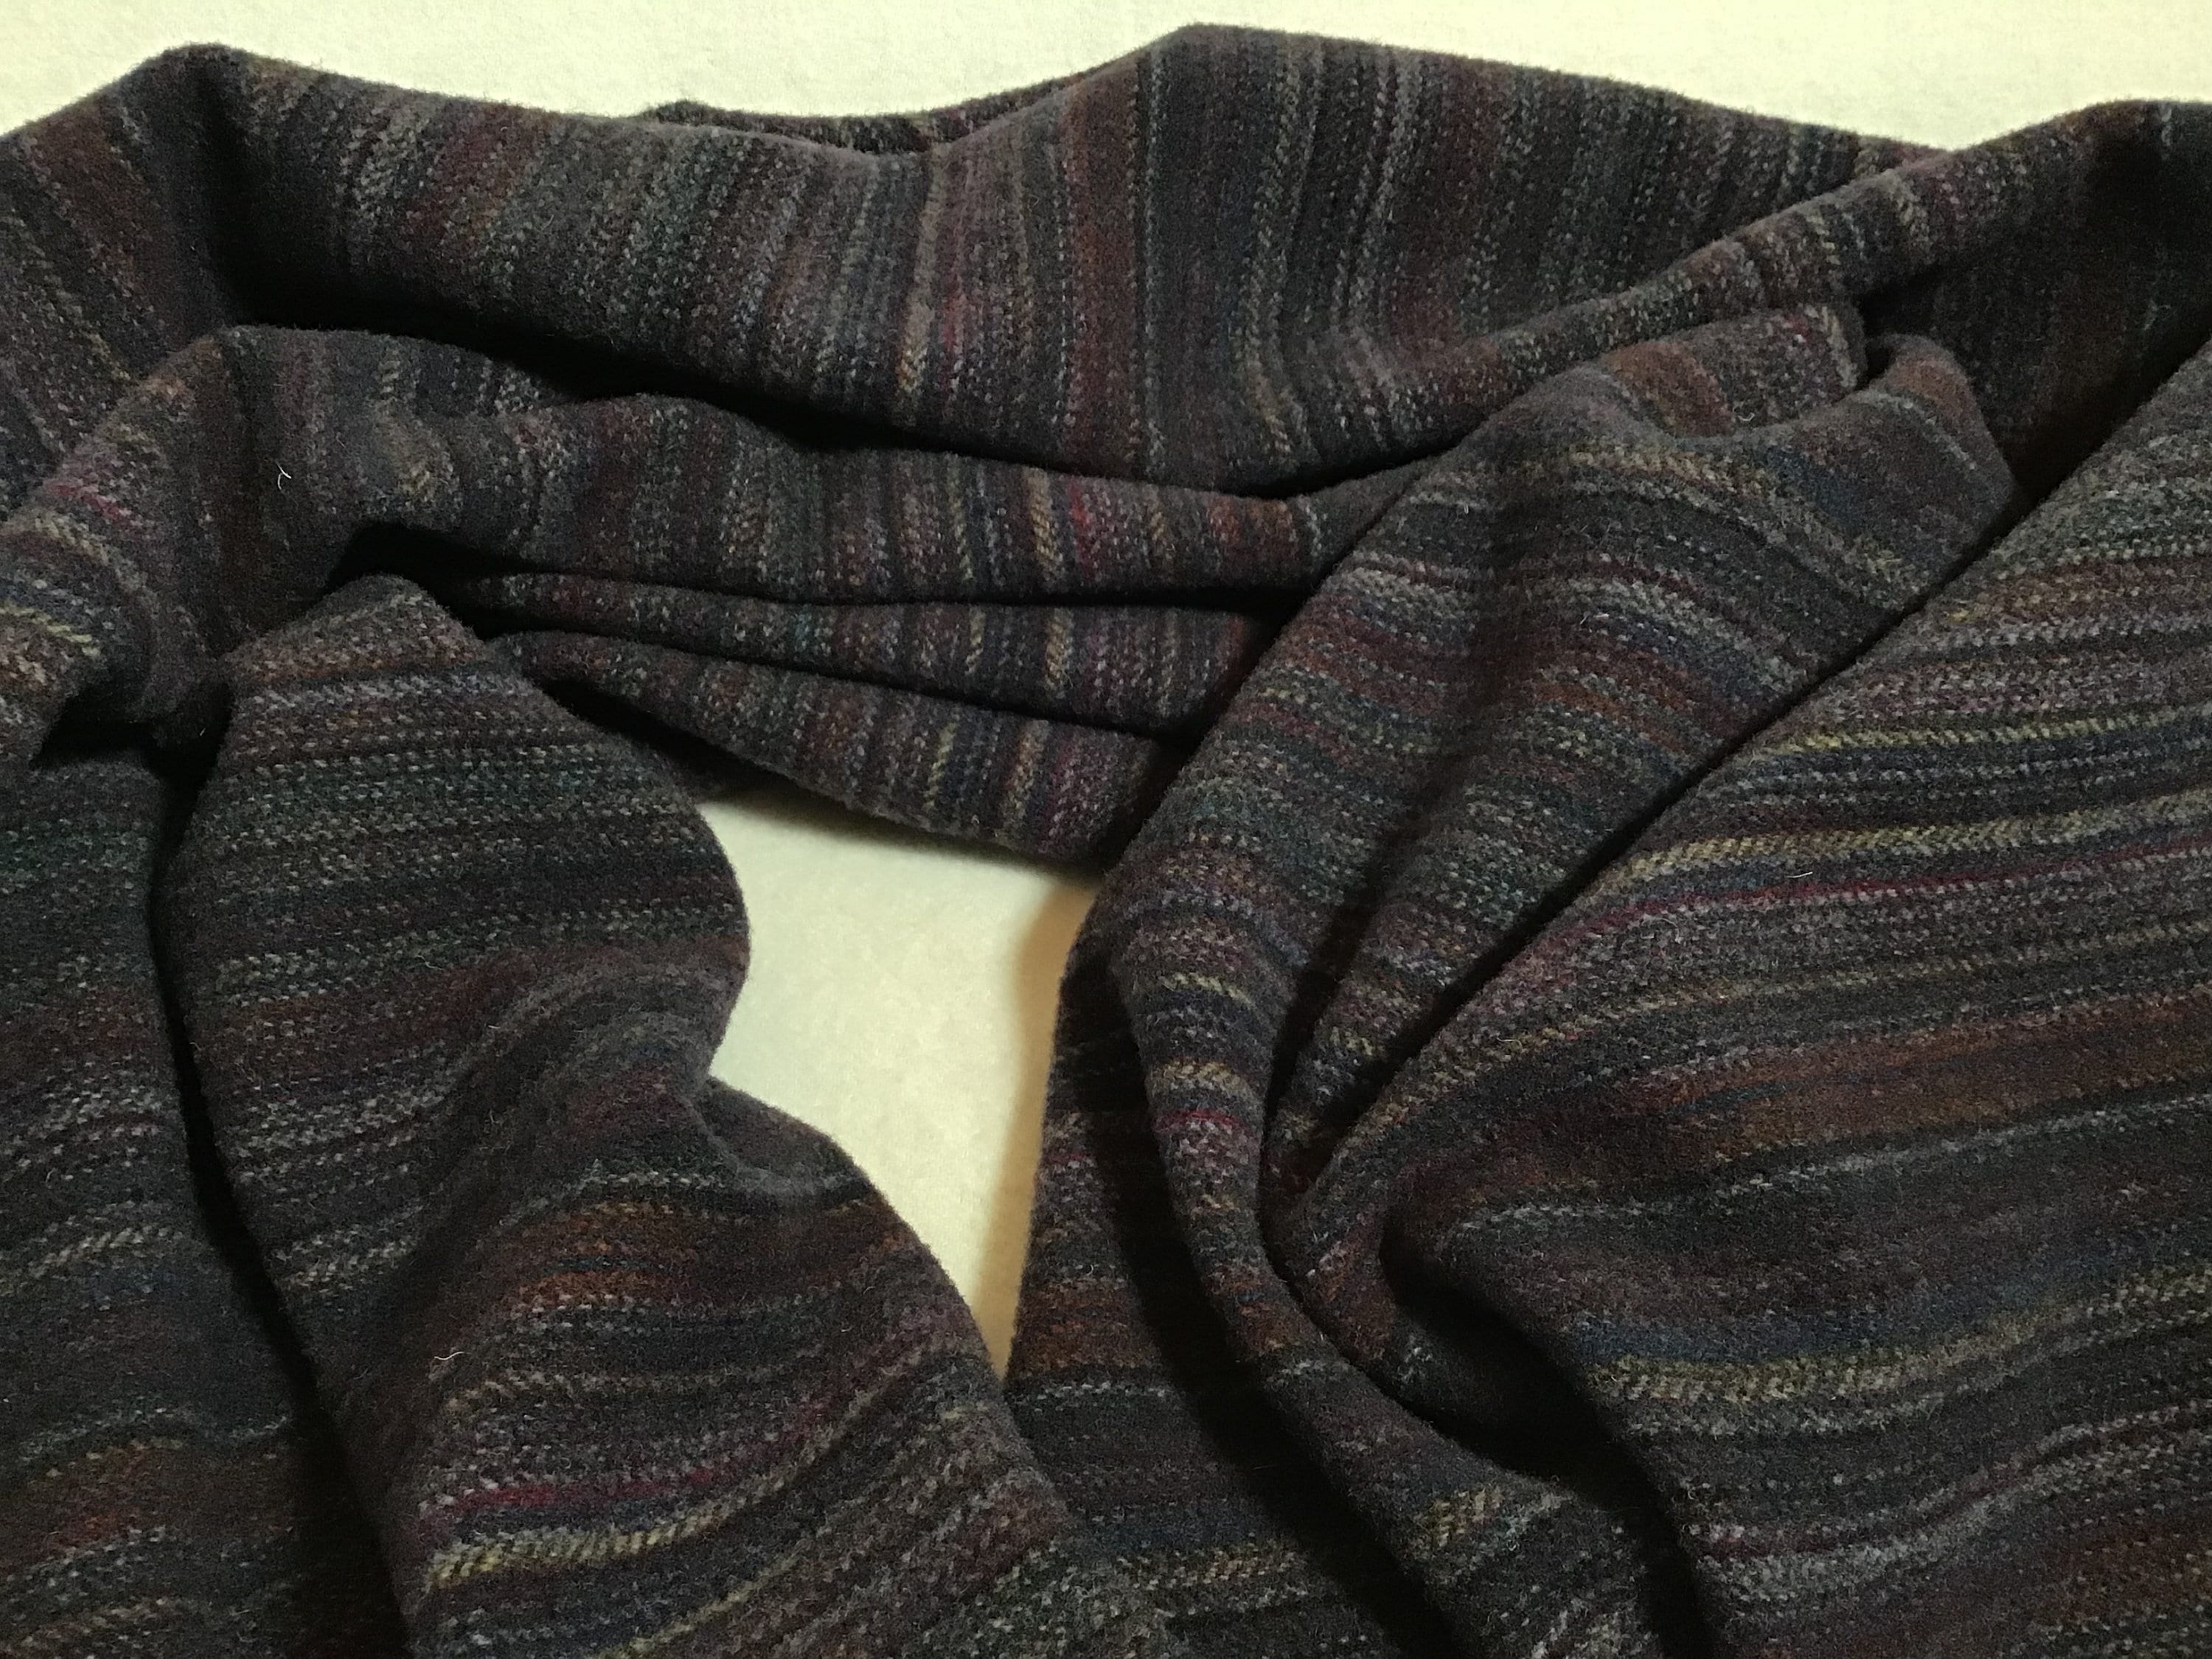 Mixed Stripe, a Cranberry, Blue and Purple Stripe Mill-Dyed Wool Fabric for  Rug Hooking, Applique, Penny Rugs, Fiber Arts,Fat 1/4 Yard, W521